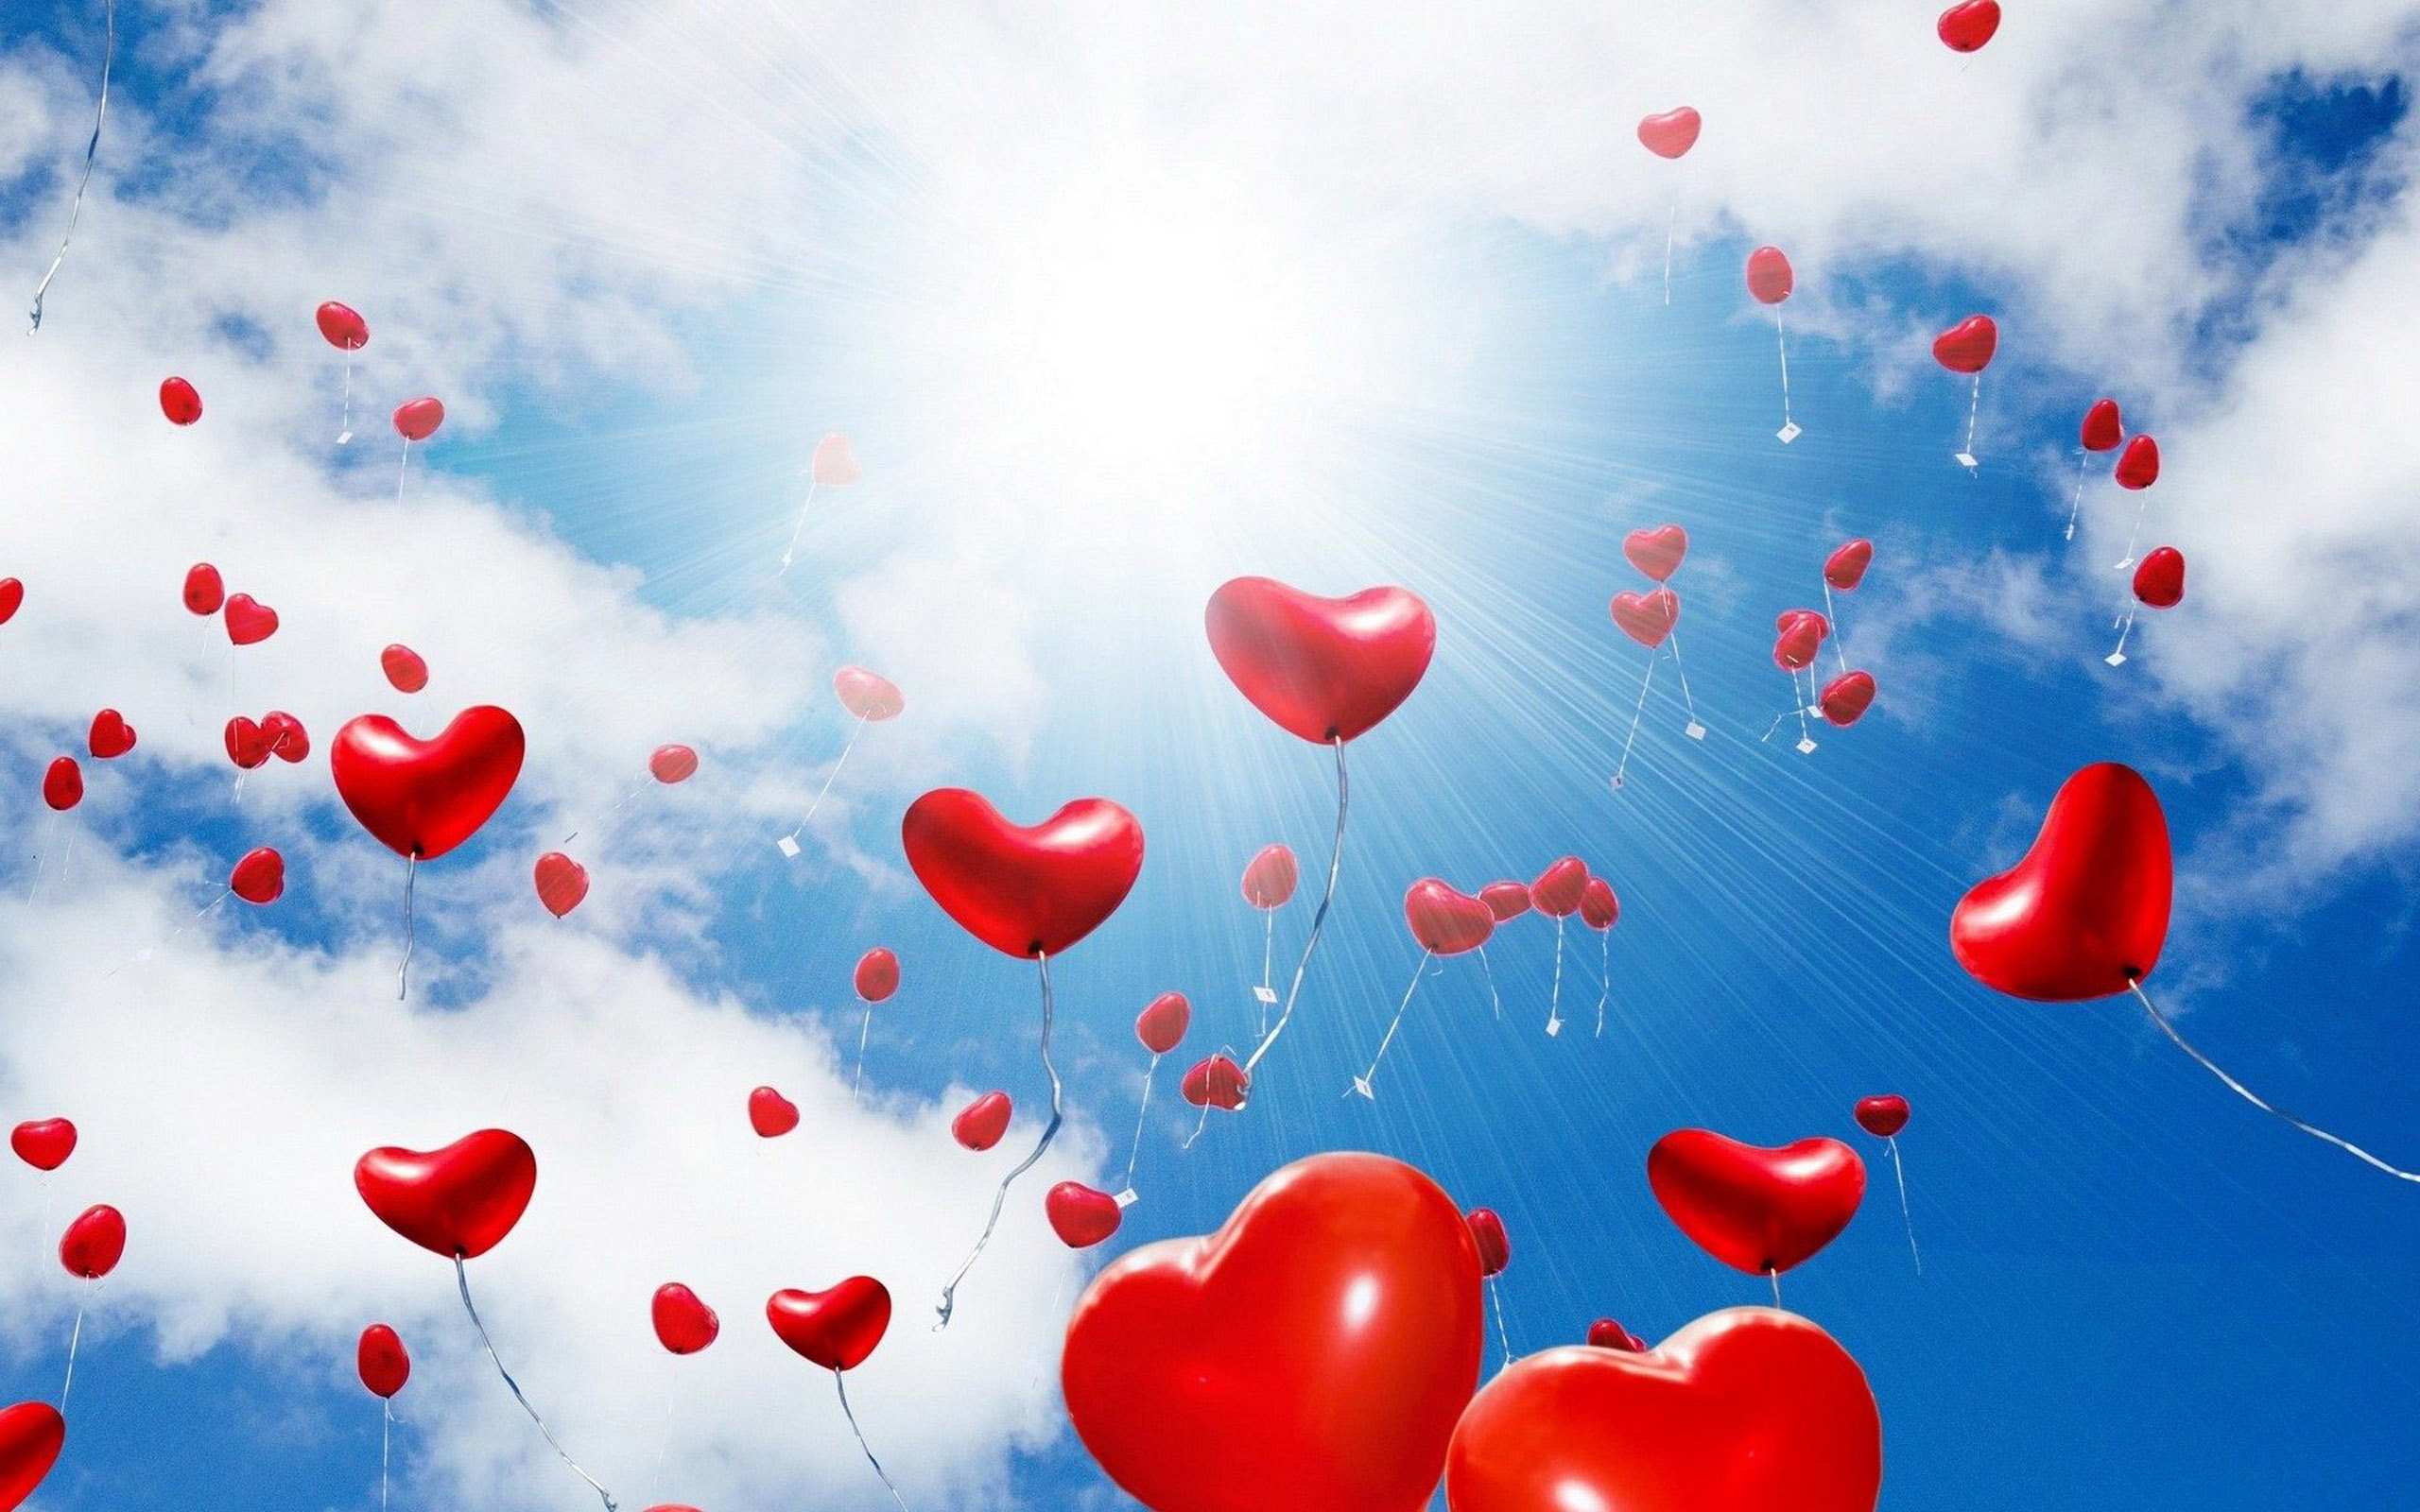 Red Balloons In The Shape Of A Heart Sunlight, Blue Sky And White Clouds  Desktop Wallpaper Hd Resolution : 